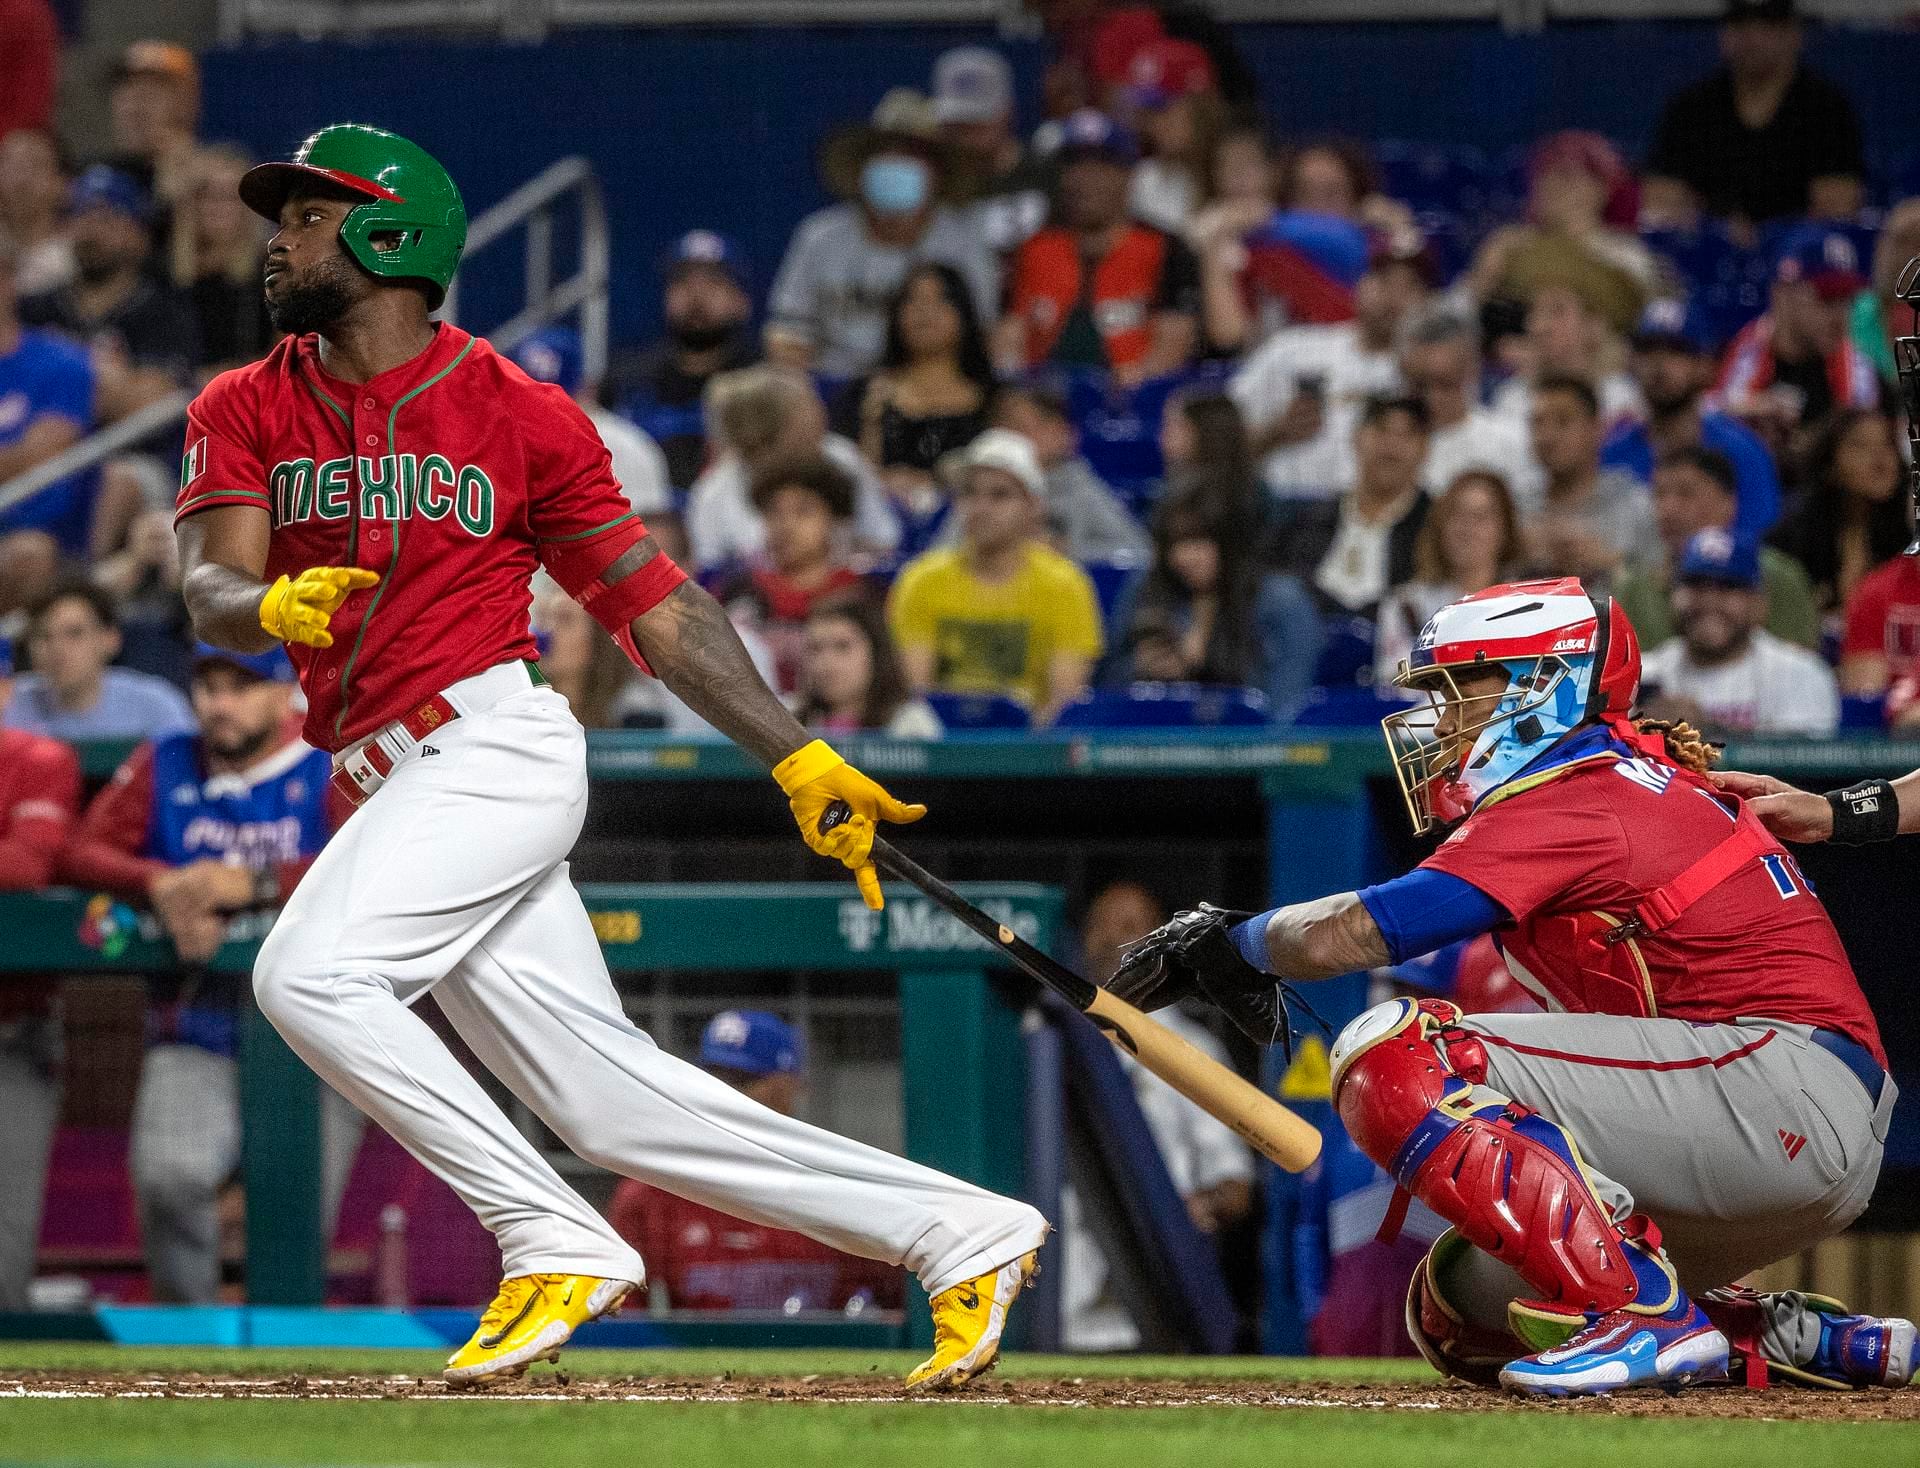 Mexico makes history in the WBC: Defeats Puerto Rico and advances to the semifinals